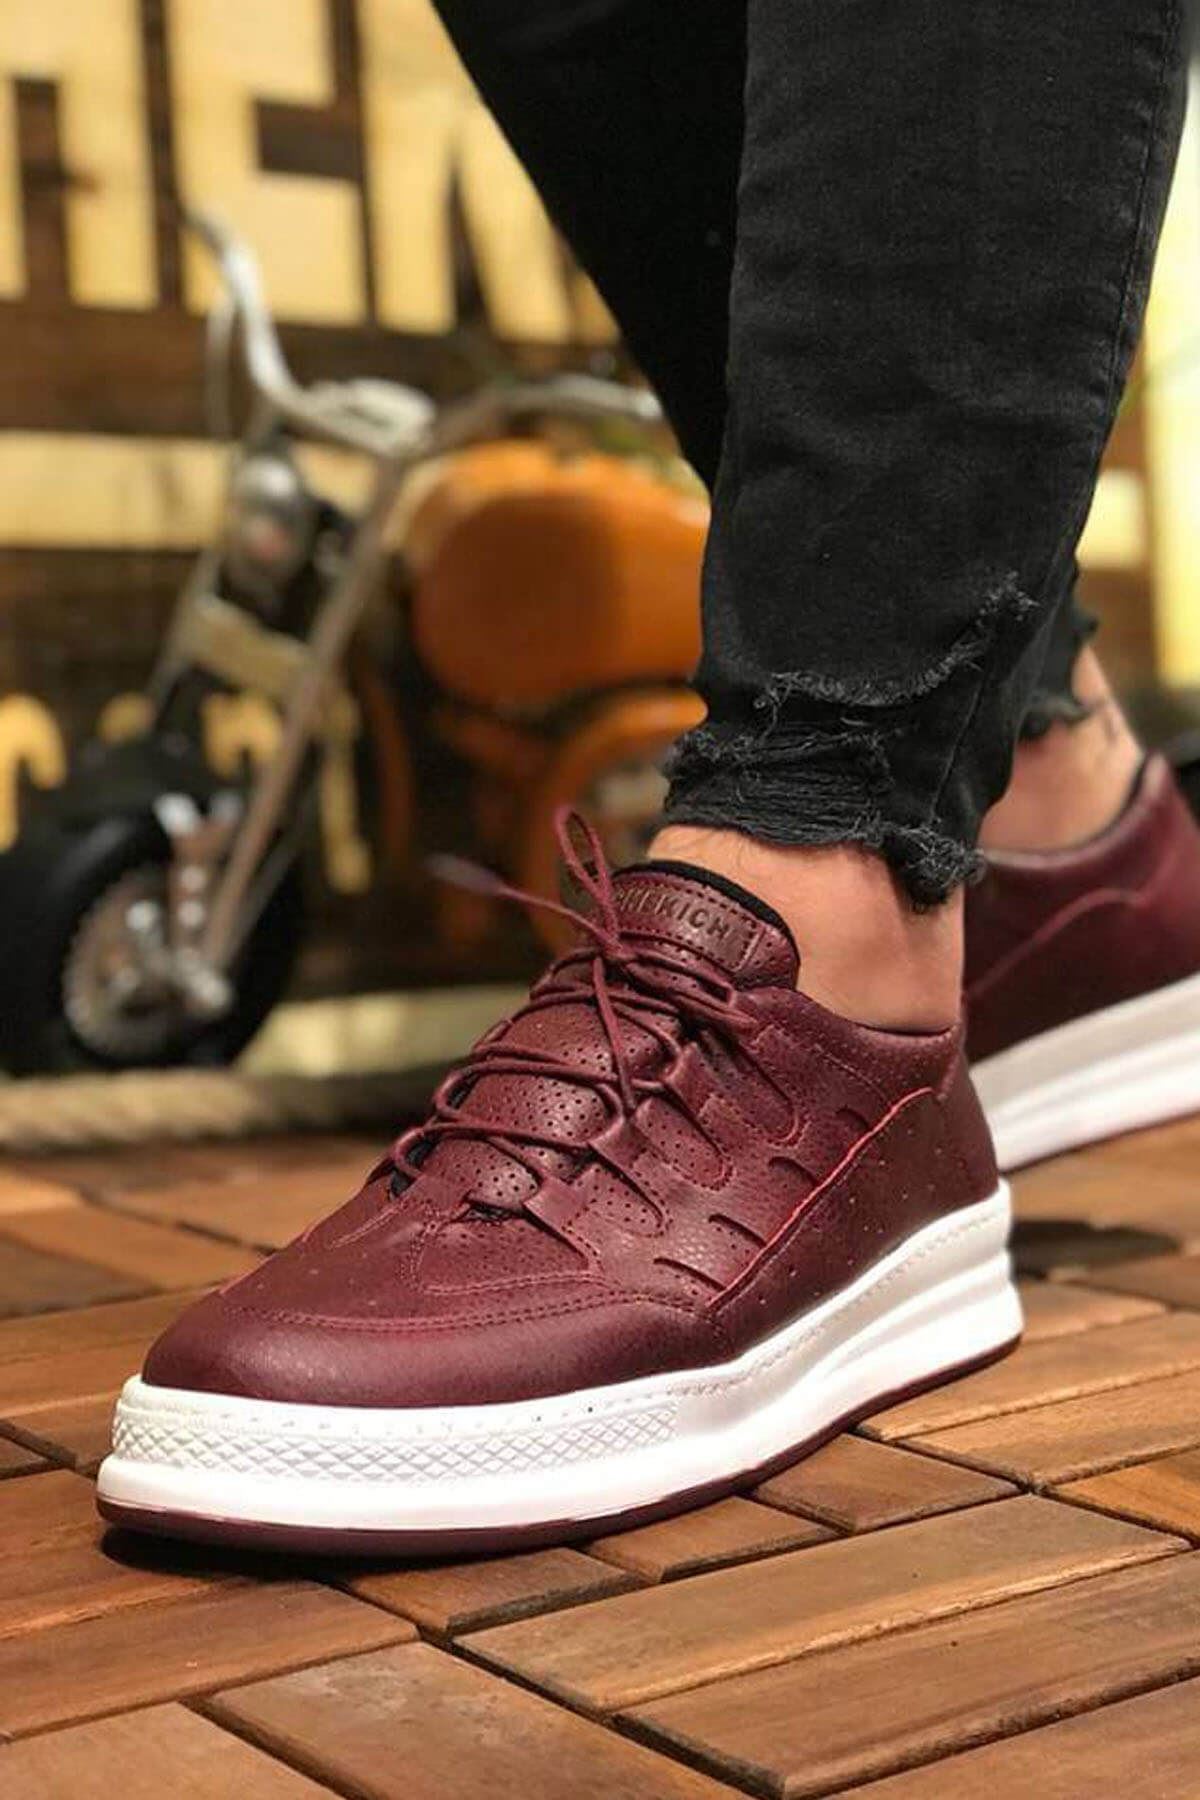 Chekich Men's Casual Shoes Claret Red Color Non Leather Summer Season Flexible Fashion Breathable Wedding Formal Suits Office Flat Orthopedic Sewing and High Outsole White Base Walking Sneakers Odorless CH040 V2